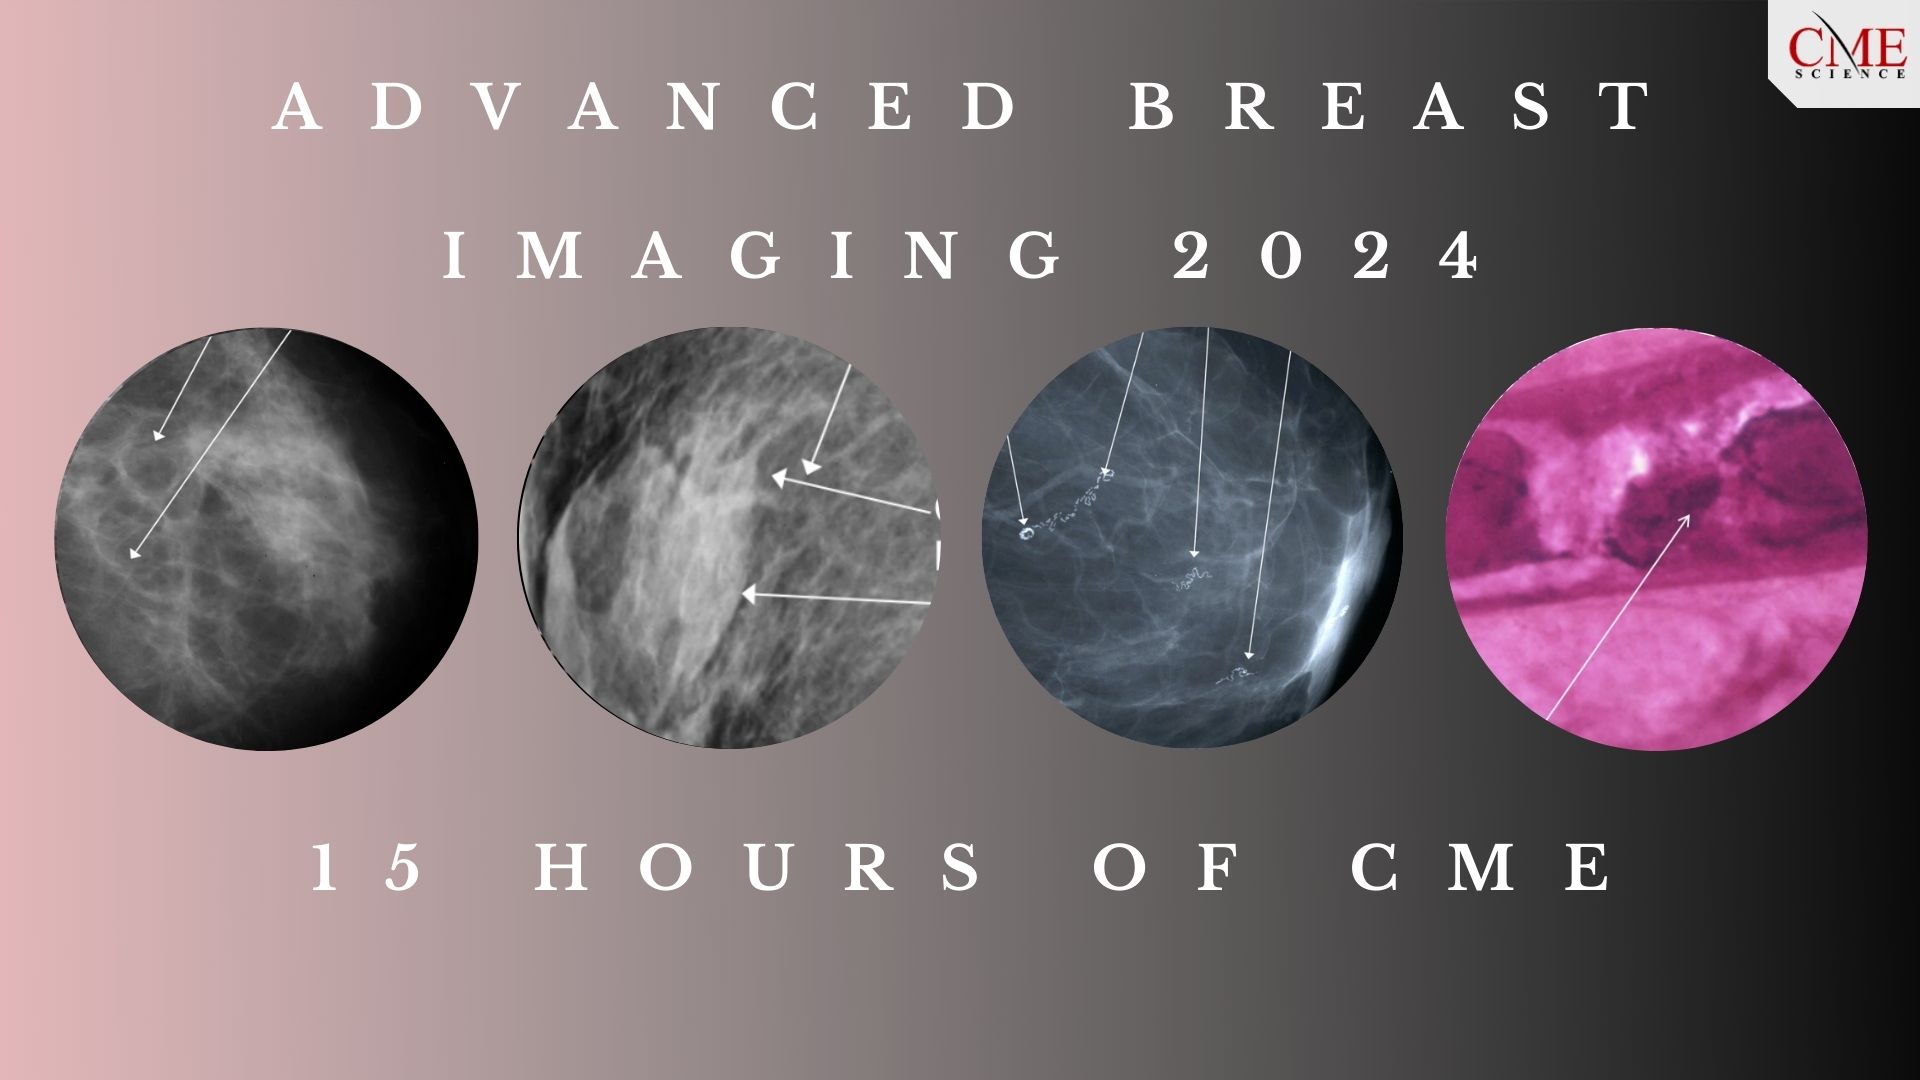 Advanved Breast Imaging 2024 Card